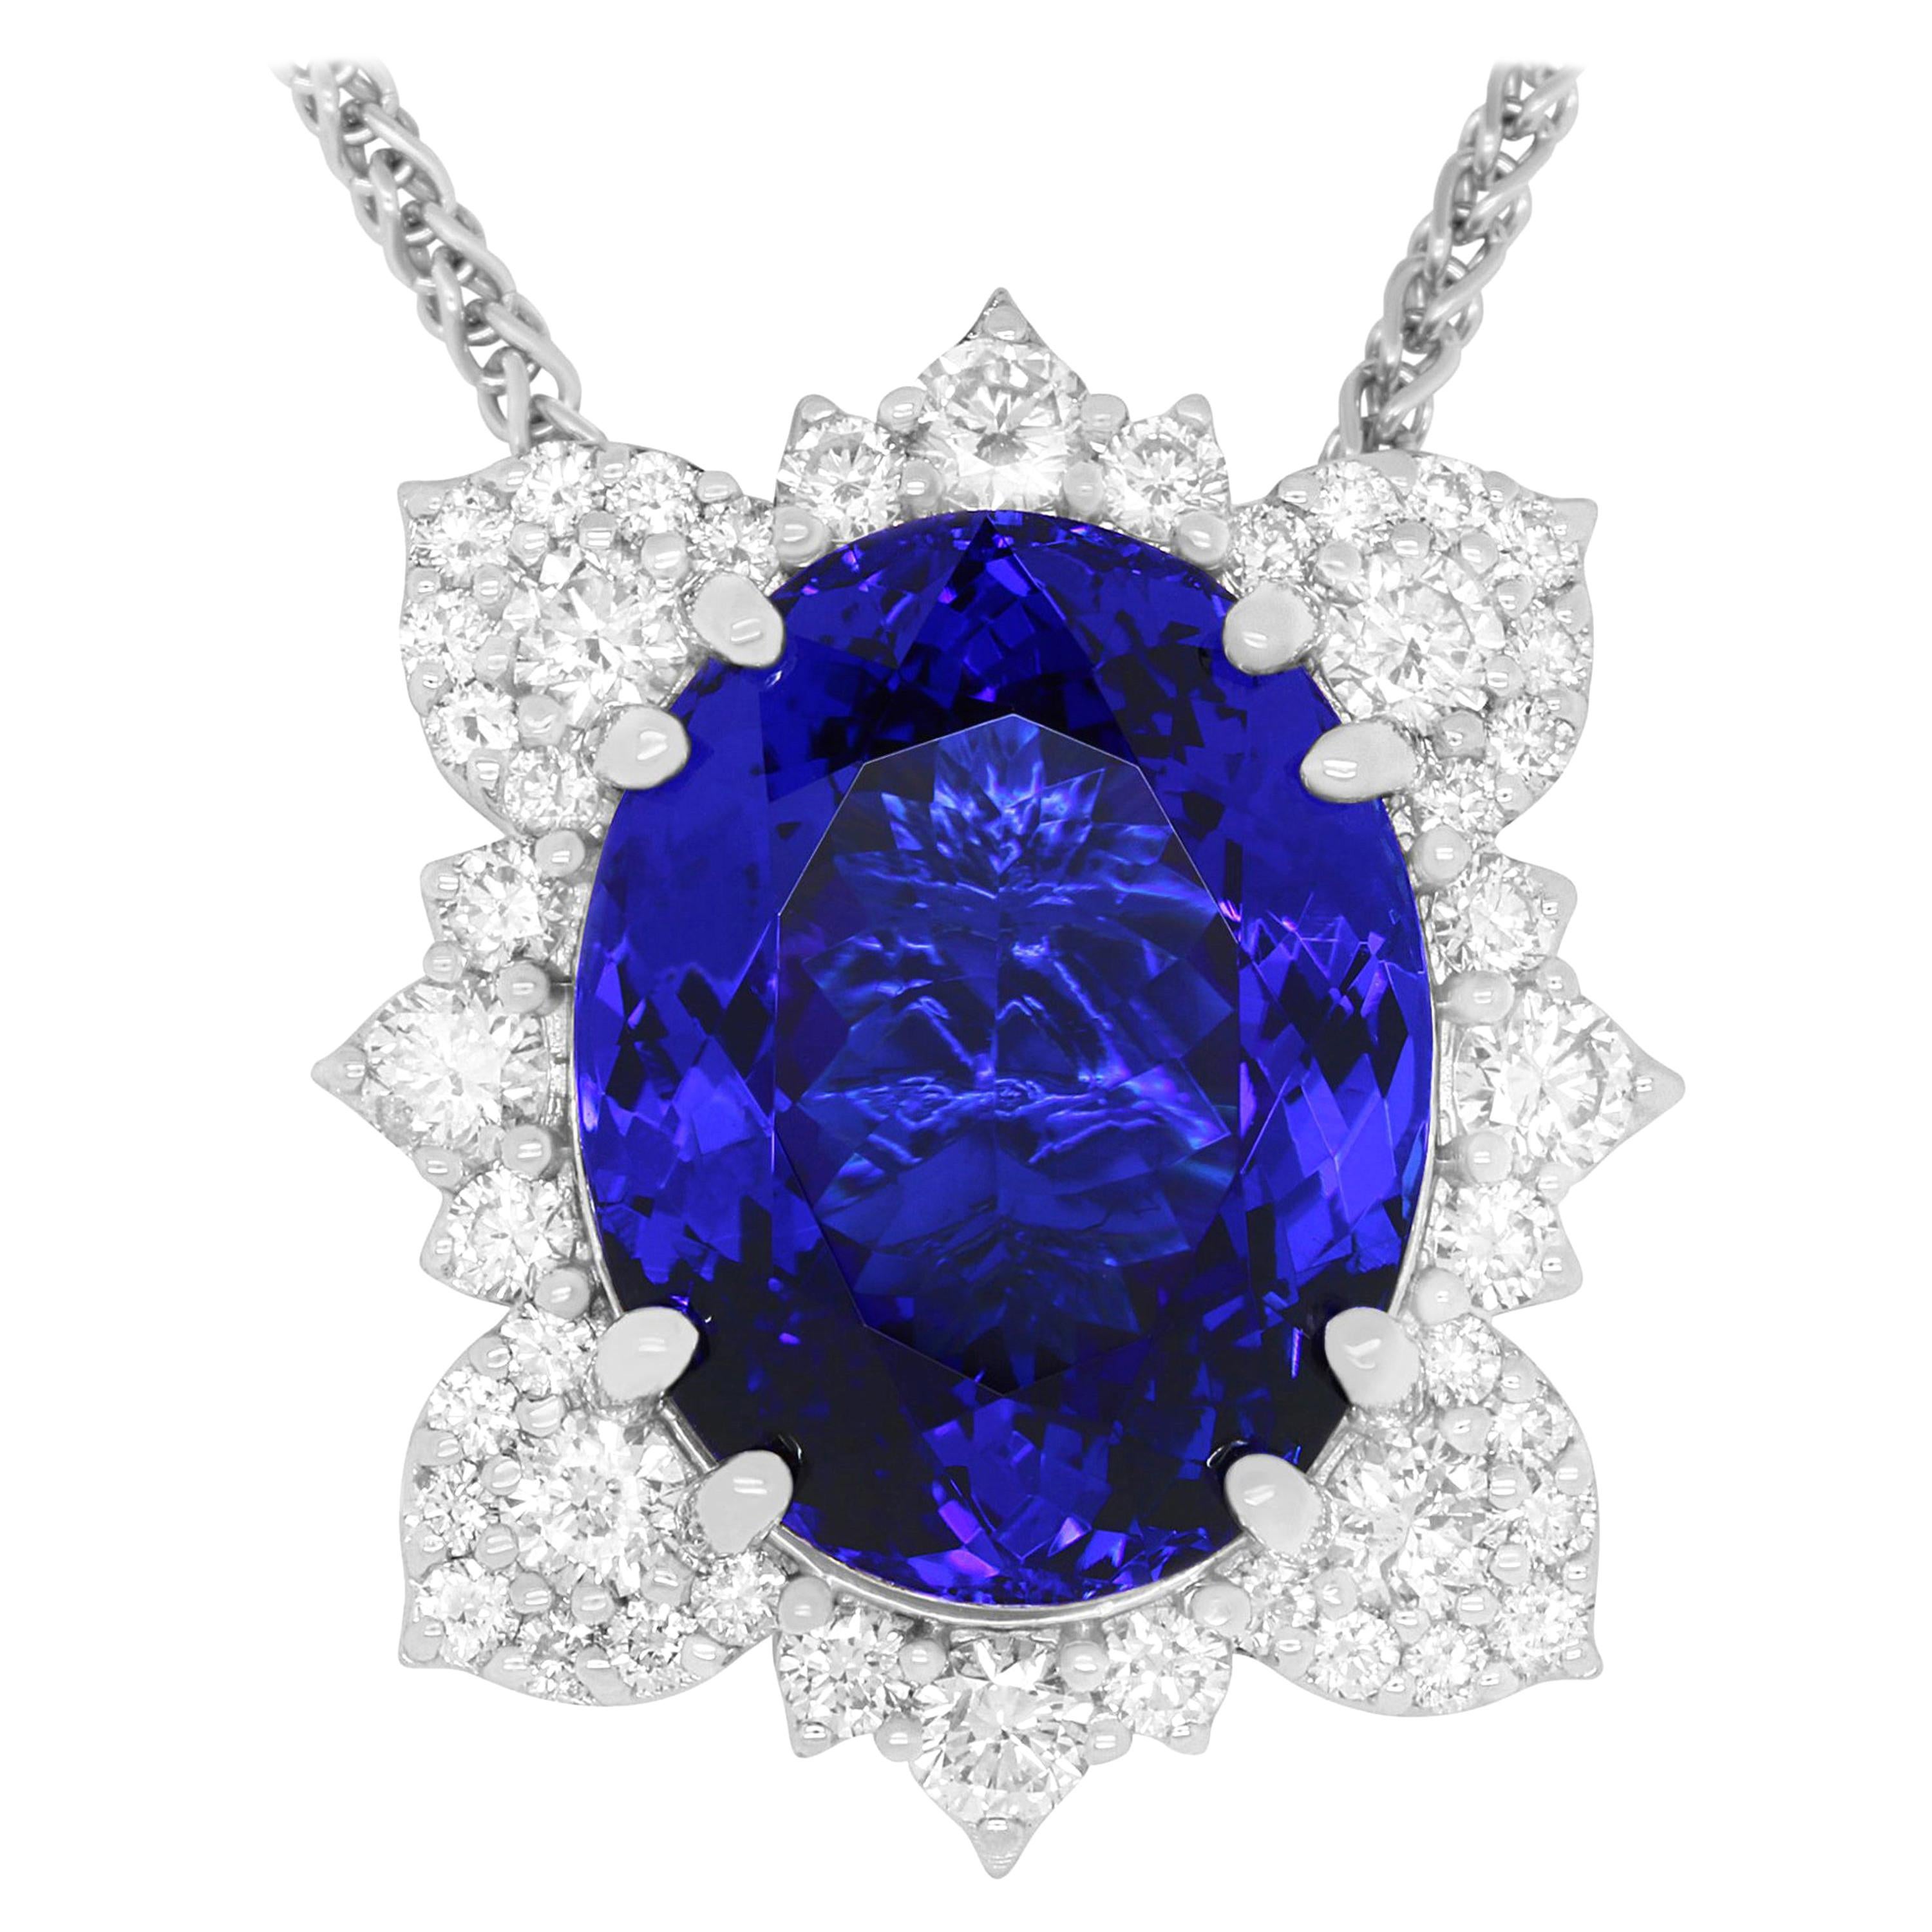 17.02 Carat Oval Shaped AAA Tanzanite and White Diamond Flower Pendant 18K Gold For Sale